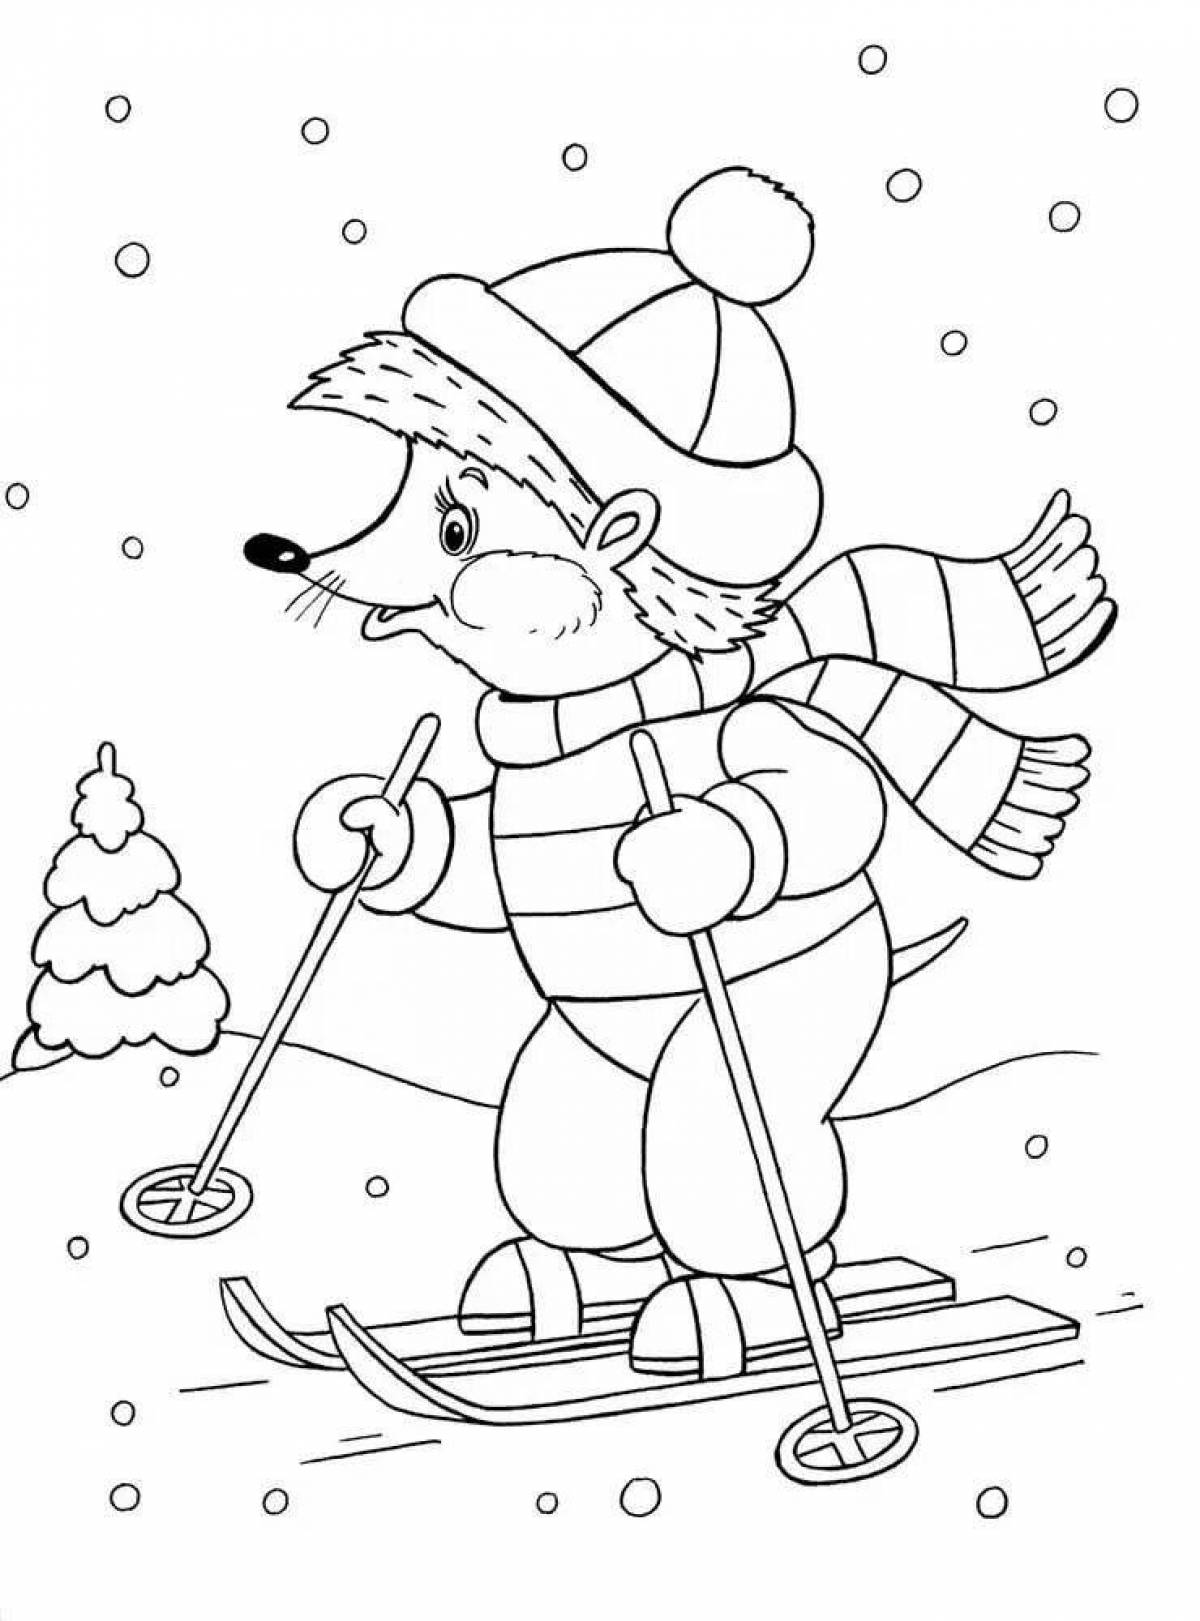 Charming coloring page 3 4 years of winter